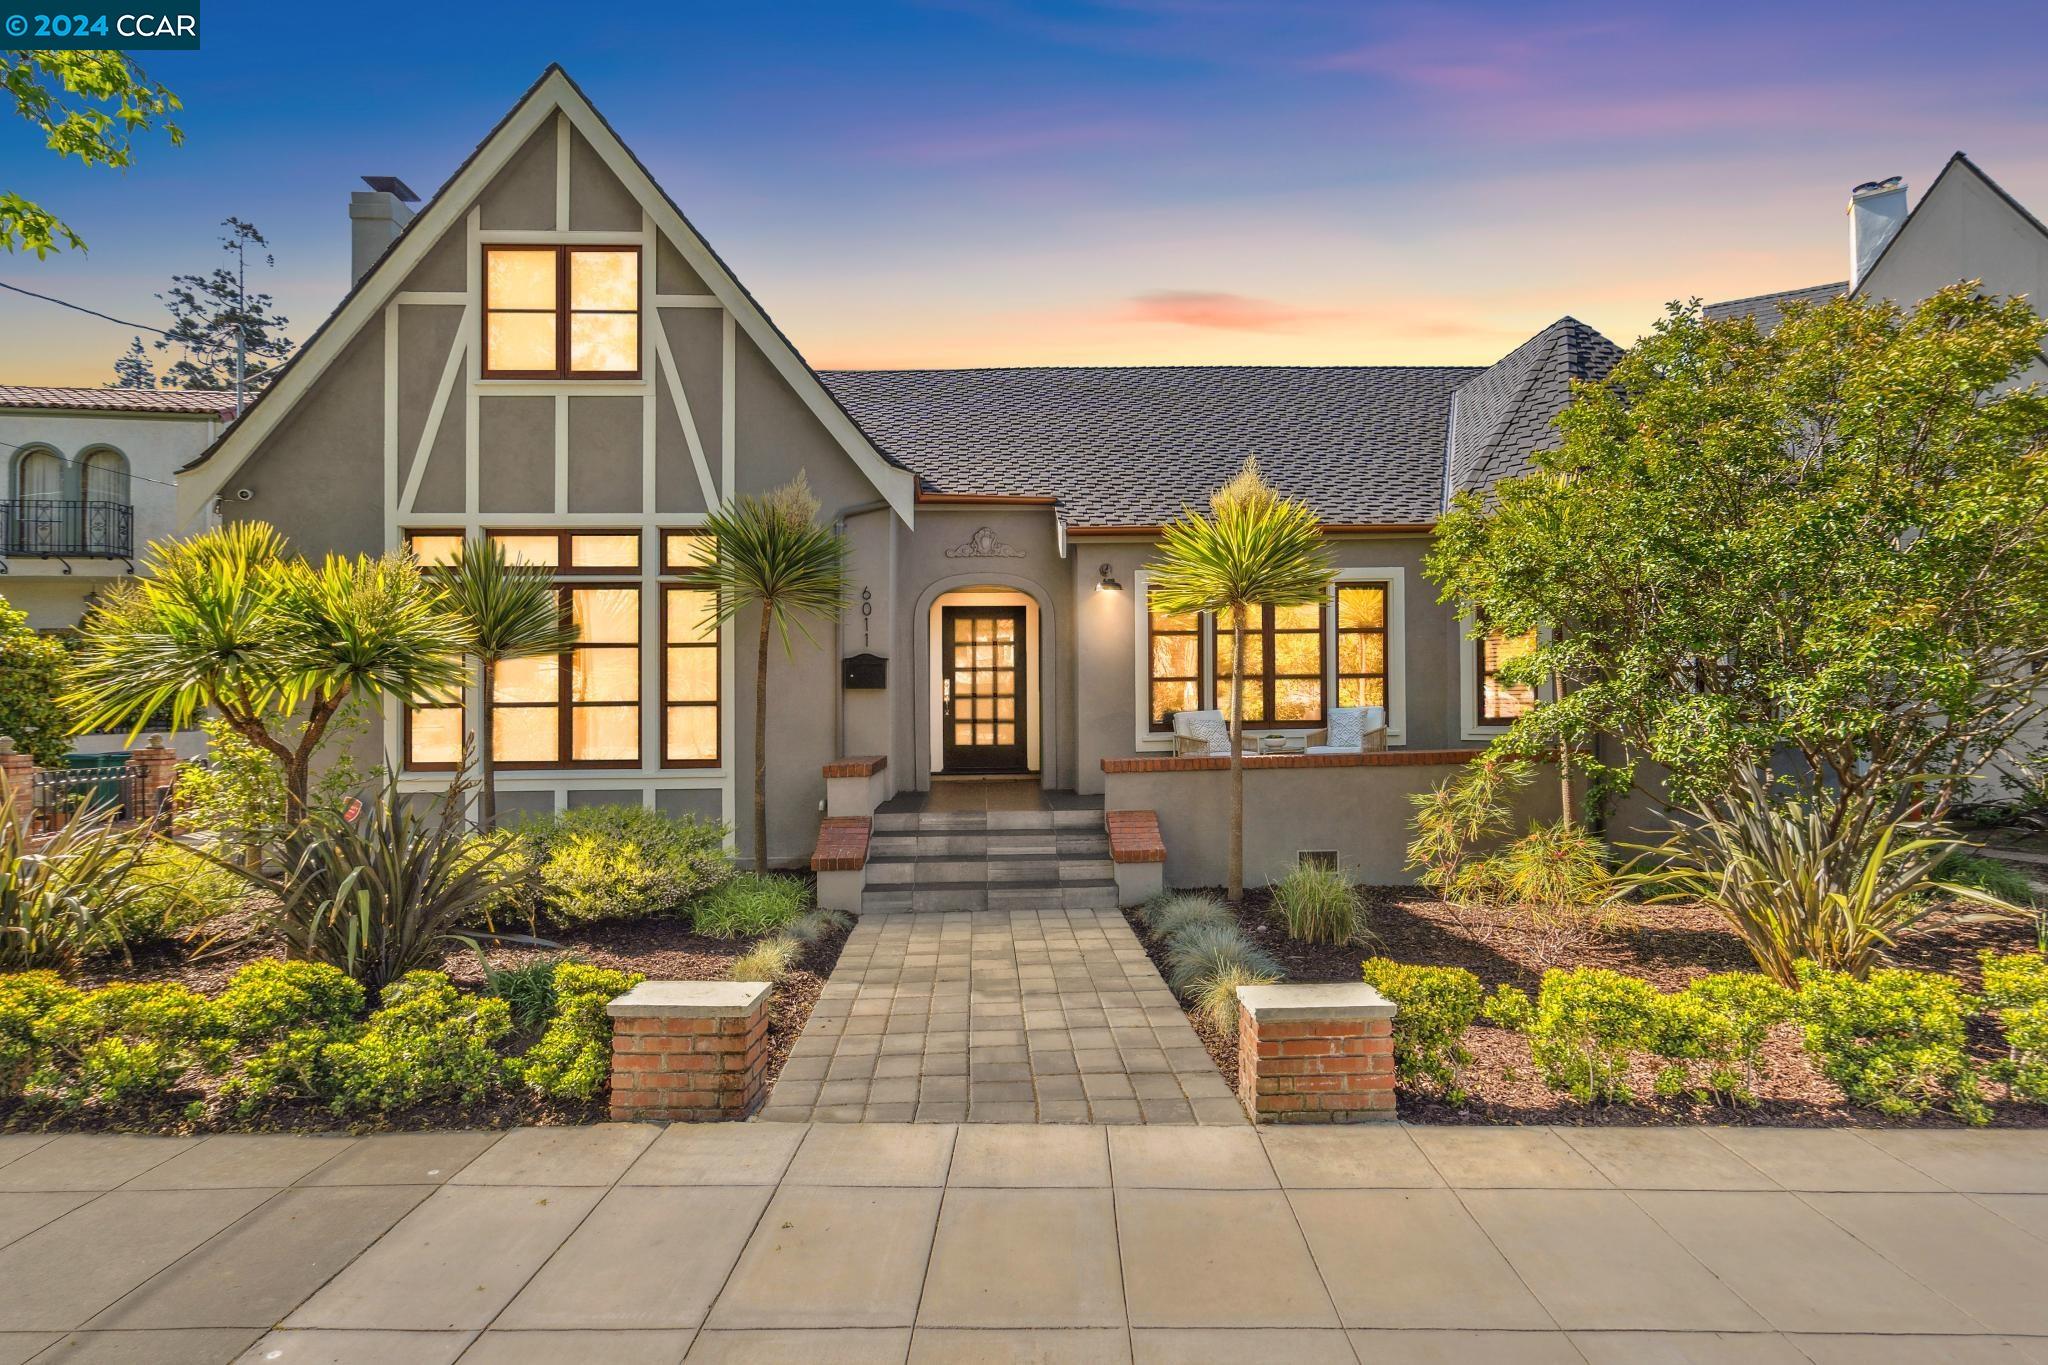 Traditional charm meets contemporary style in this enchanted Tudor gem in the heart of Rockridge. With two major renovations since 2016, this home features luxury finishes and cutting-edge smart home tech from Nest and Lutron throughout. The flexible two story floor plan boasts multiple bedrooms and a generous common area on both floors allowing for multi-zone living, working from home, and entertaining all under the same roof. Soaring 10 foot ceilings in the living room and kitchen create a boutique hotel-like experience while the garage with french doors and connected backyard flow into the kitchen for endless indoor/outdoor entertaining possibilities. Nestled in the heart of Rockridge, this highly walkable home is just blocks from Rockridge Bart, the vibrant College Ave district, and beloved Chabot Elementary. Welcome to the epitome of Rockridge living!